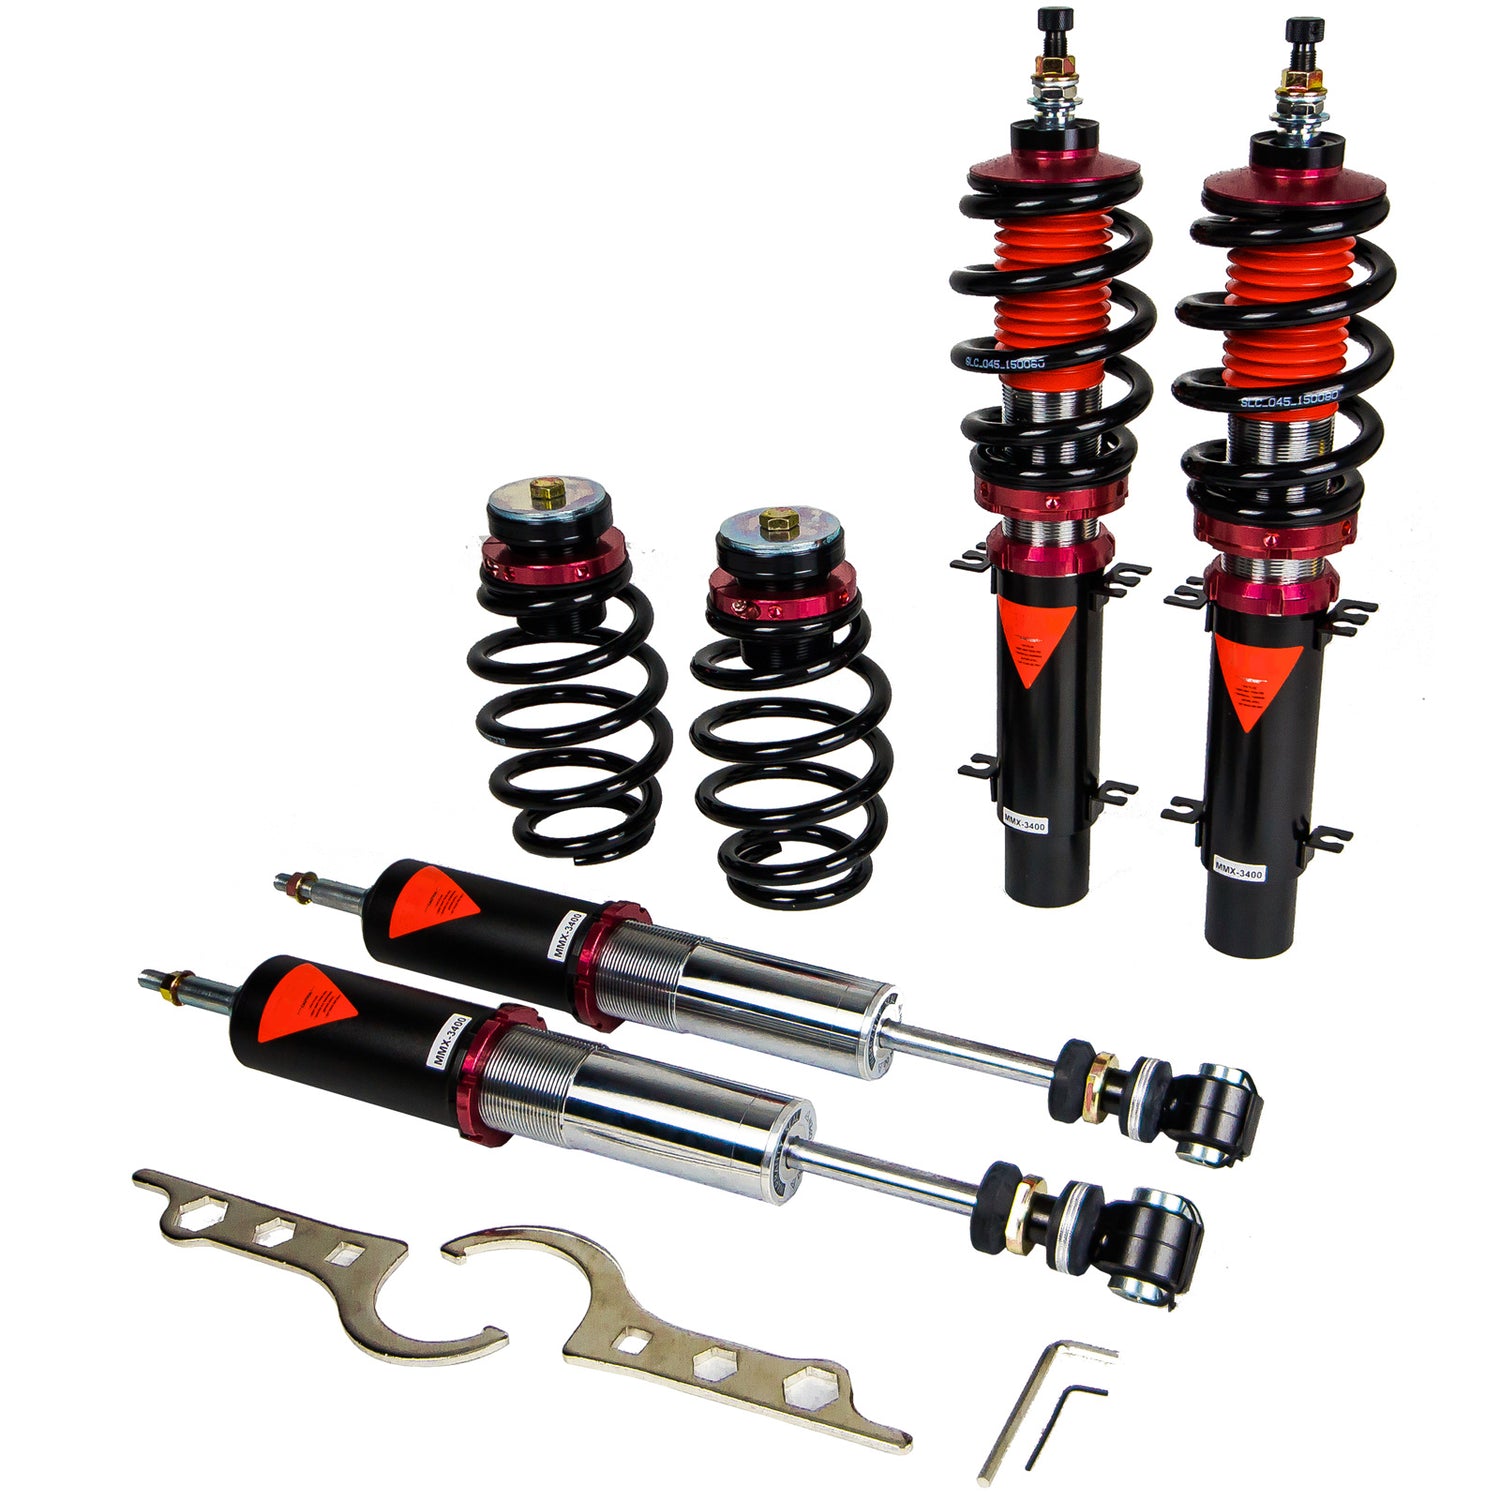 MMX3400-B MAXX Coilovers Lowering Kit, Fully Adjustable, Ride Height, 40 Clicks Rebound Settings, Volkswagen Jetta(MK4) 1999-05 FWD ONLY